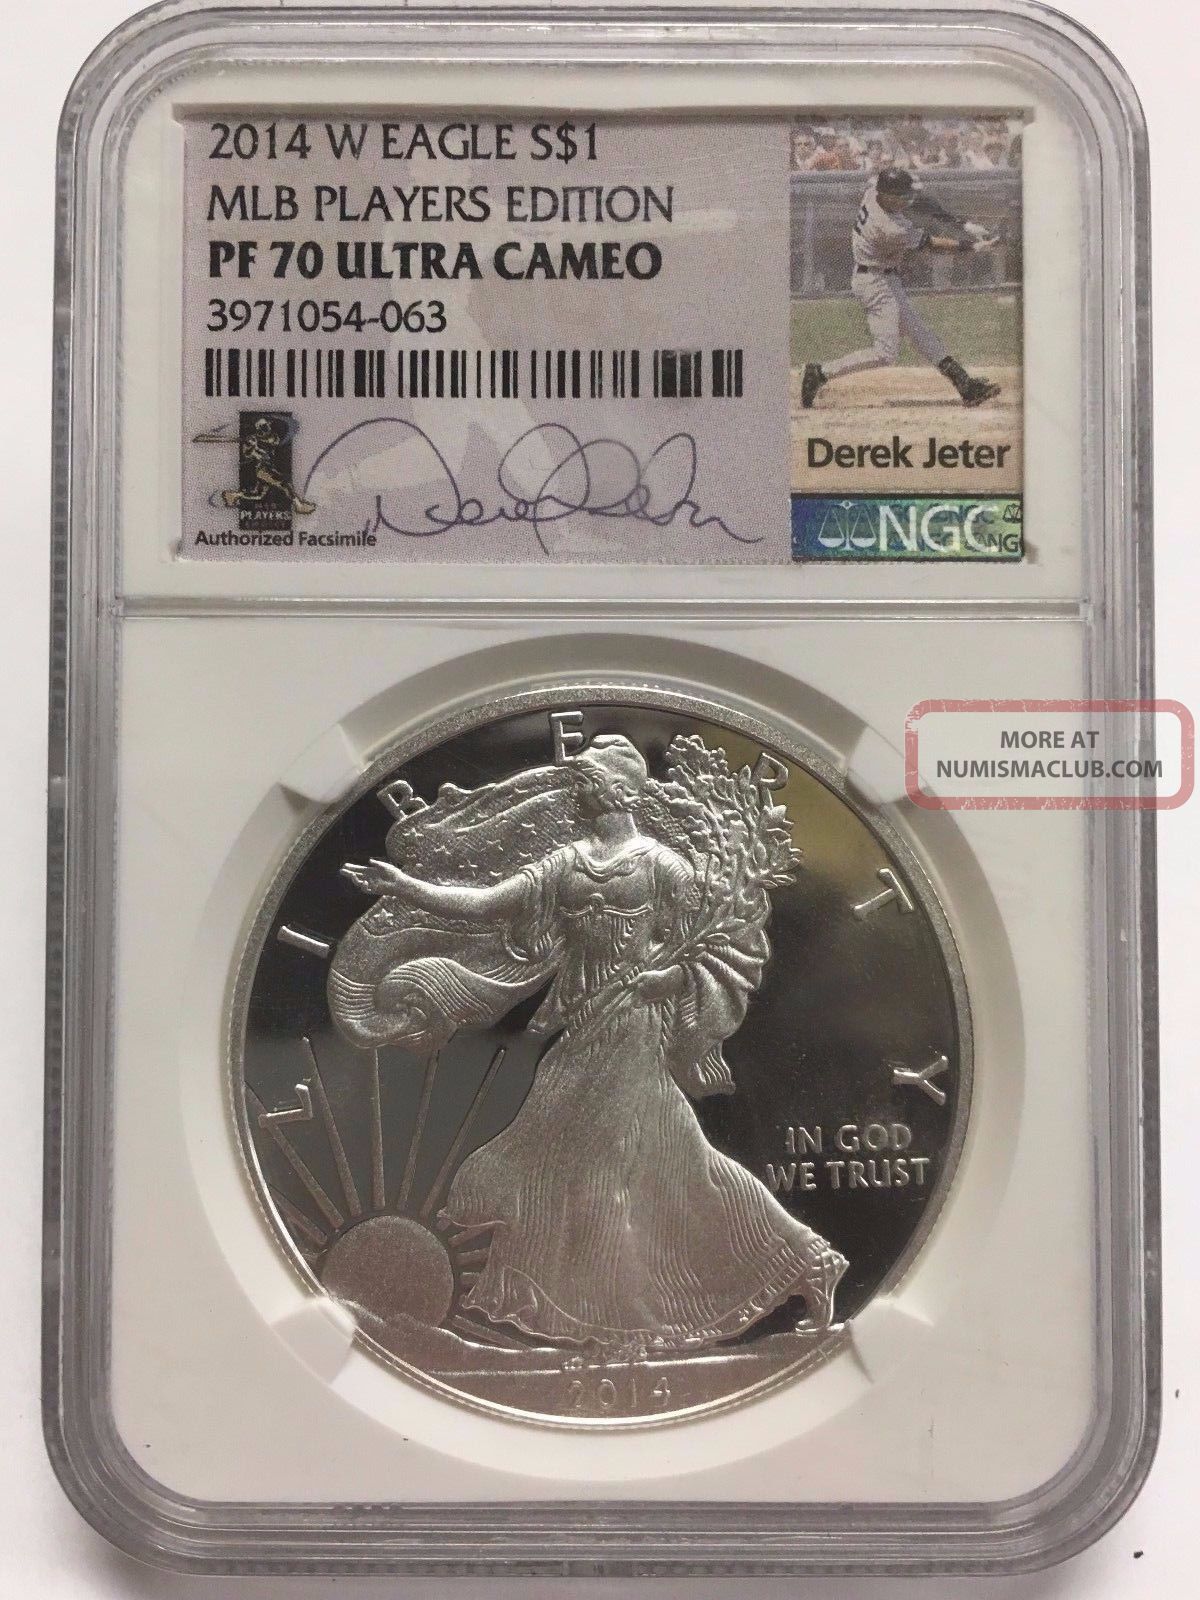 2014 W Ngc Pf 70 Ultra Cameo Mlb Signed Derek Jeter Silver Eagle Dollar $1 Coin Silver photo